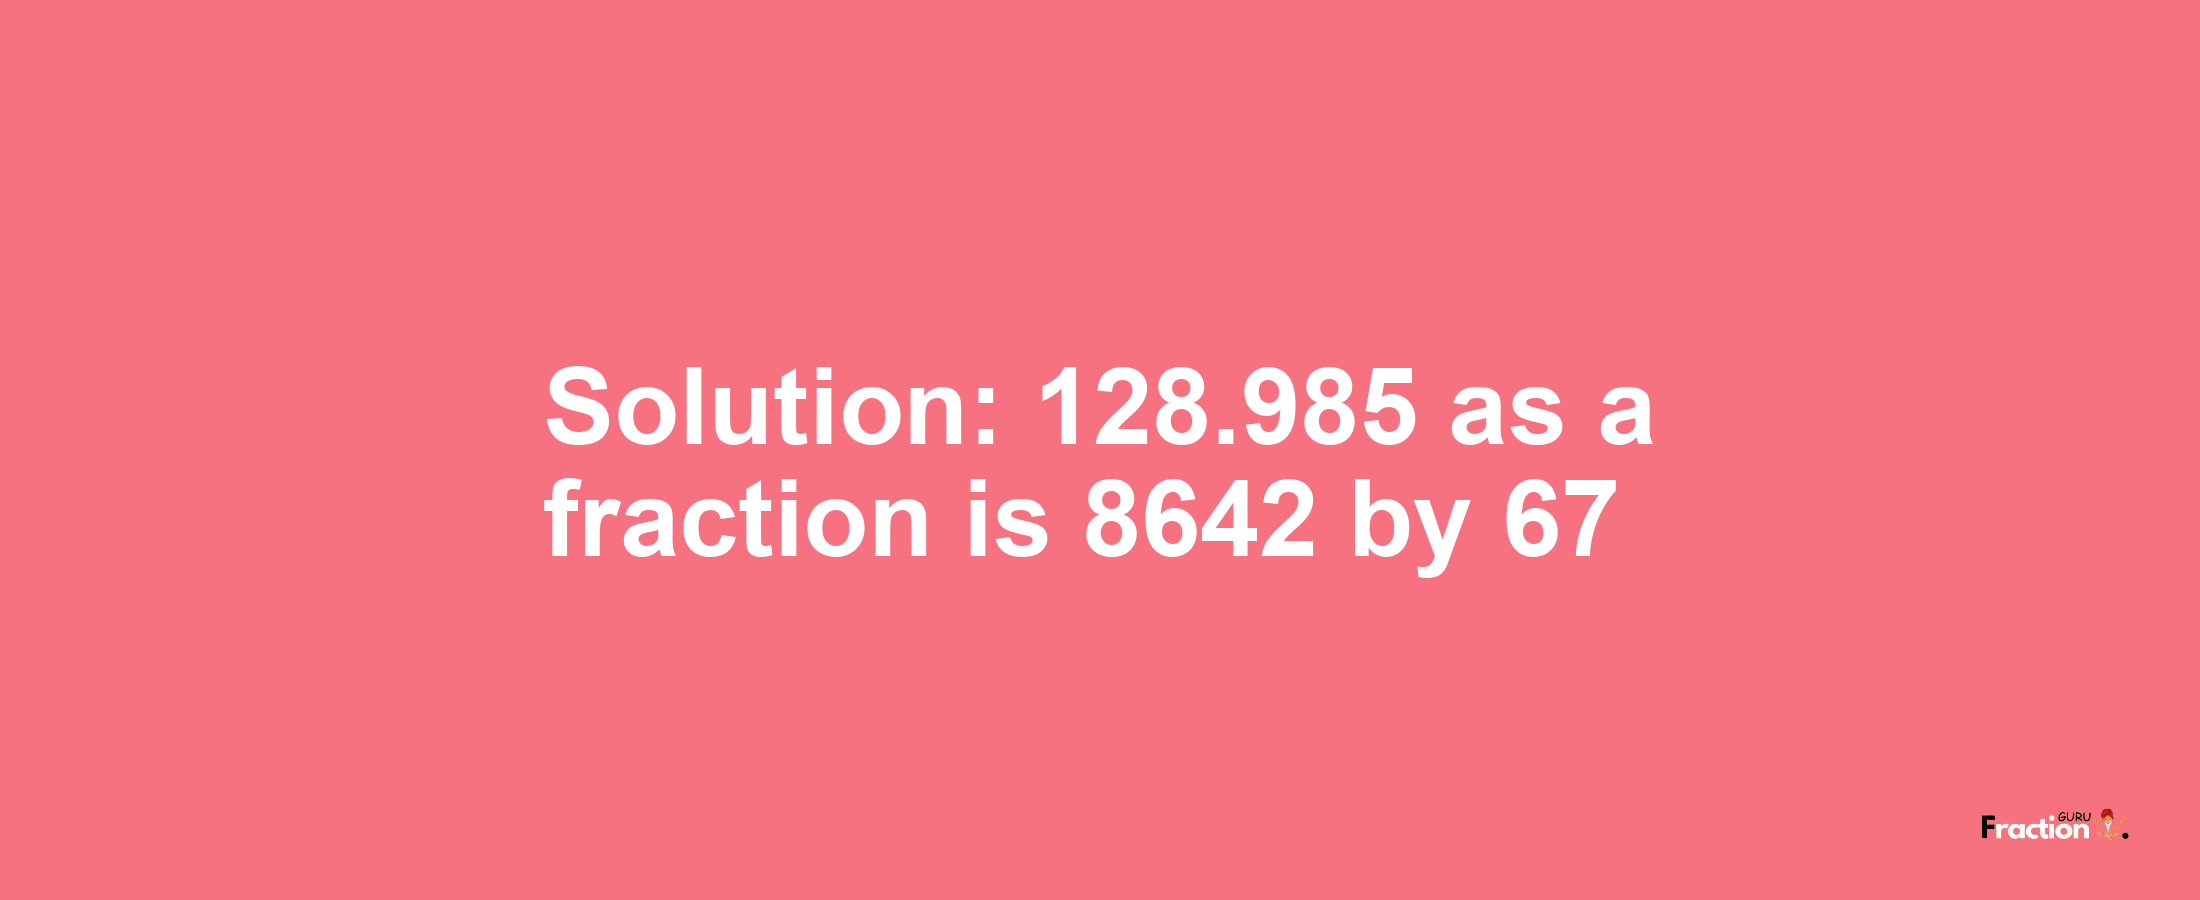 Solution:128.985 as a fraction is 8642/67